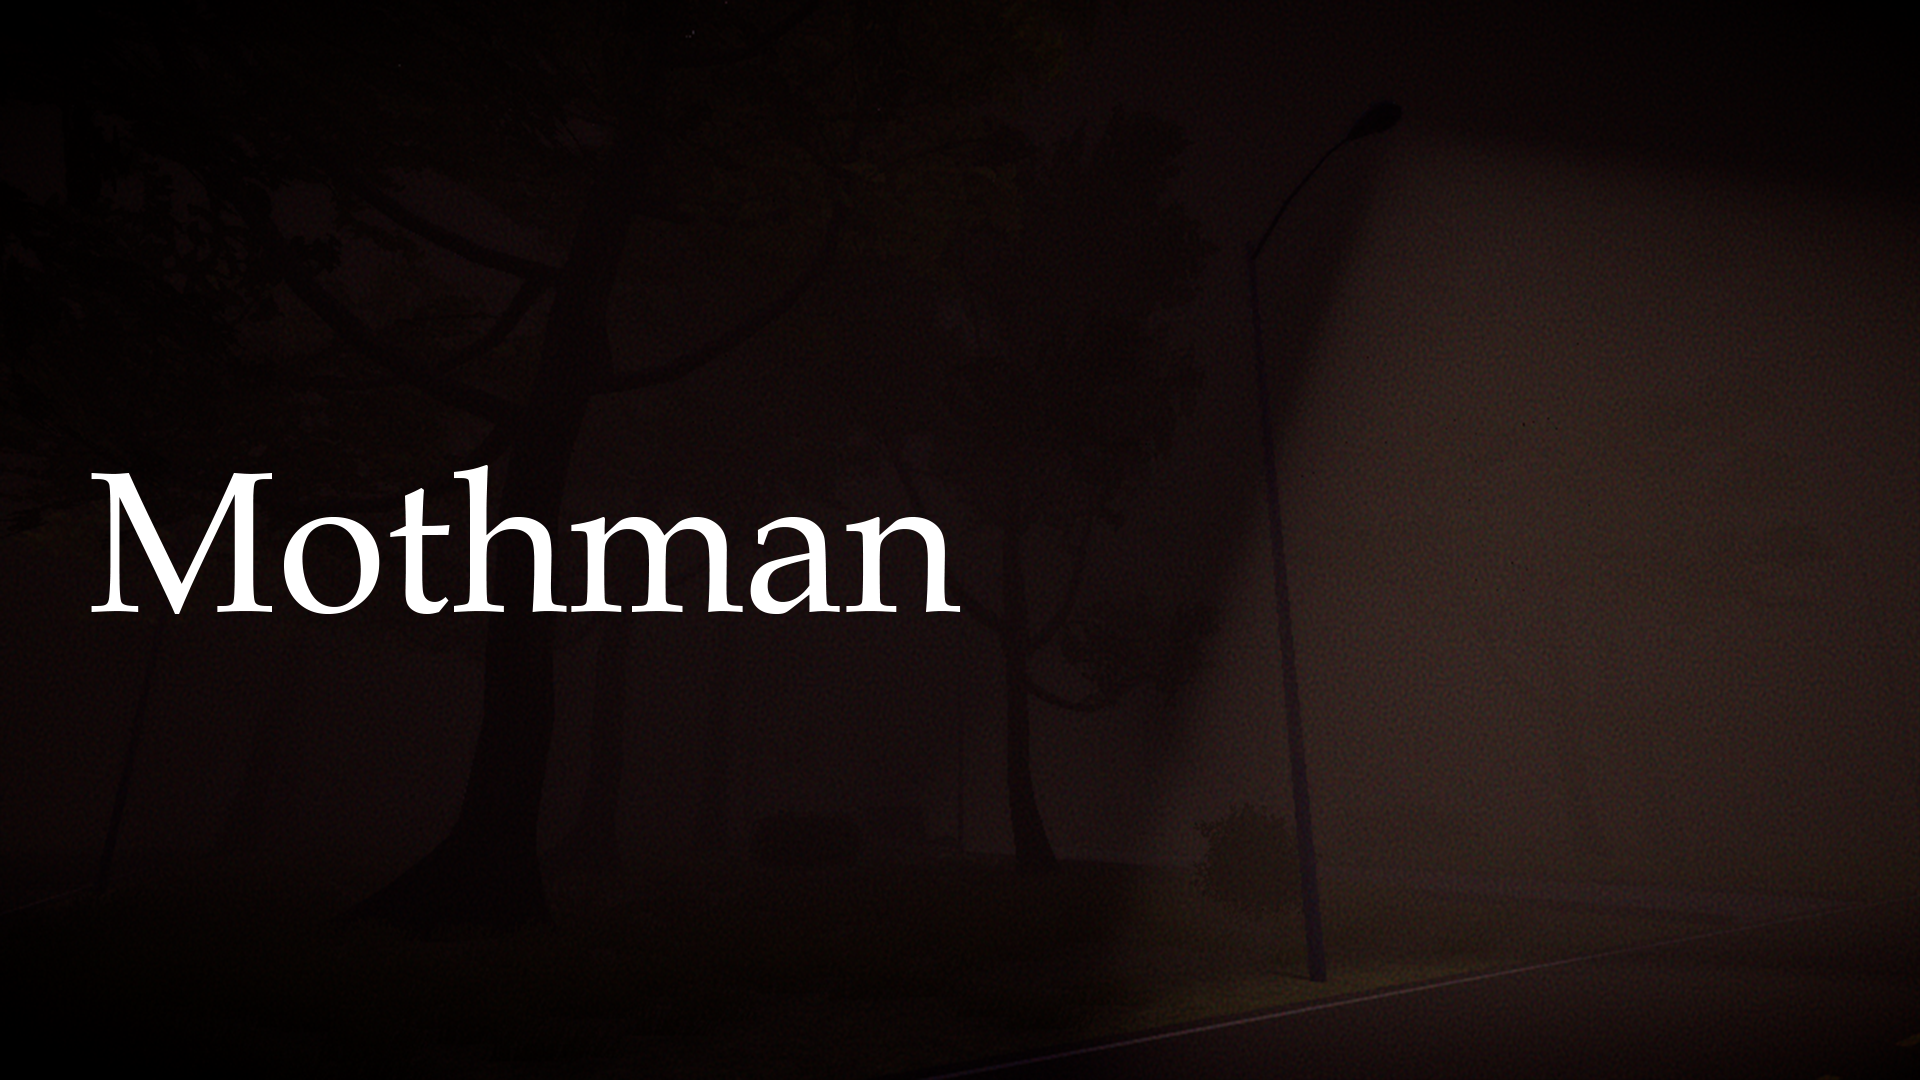 The Mothman Files by Michael Knost